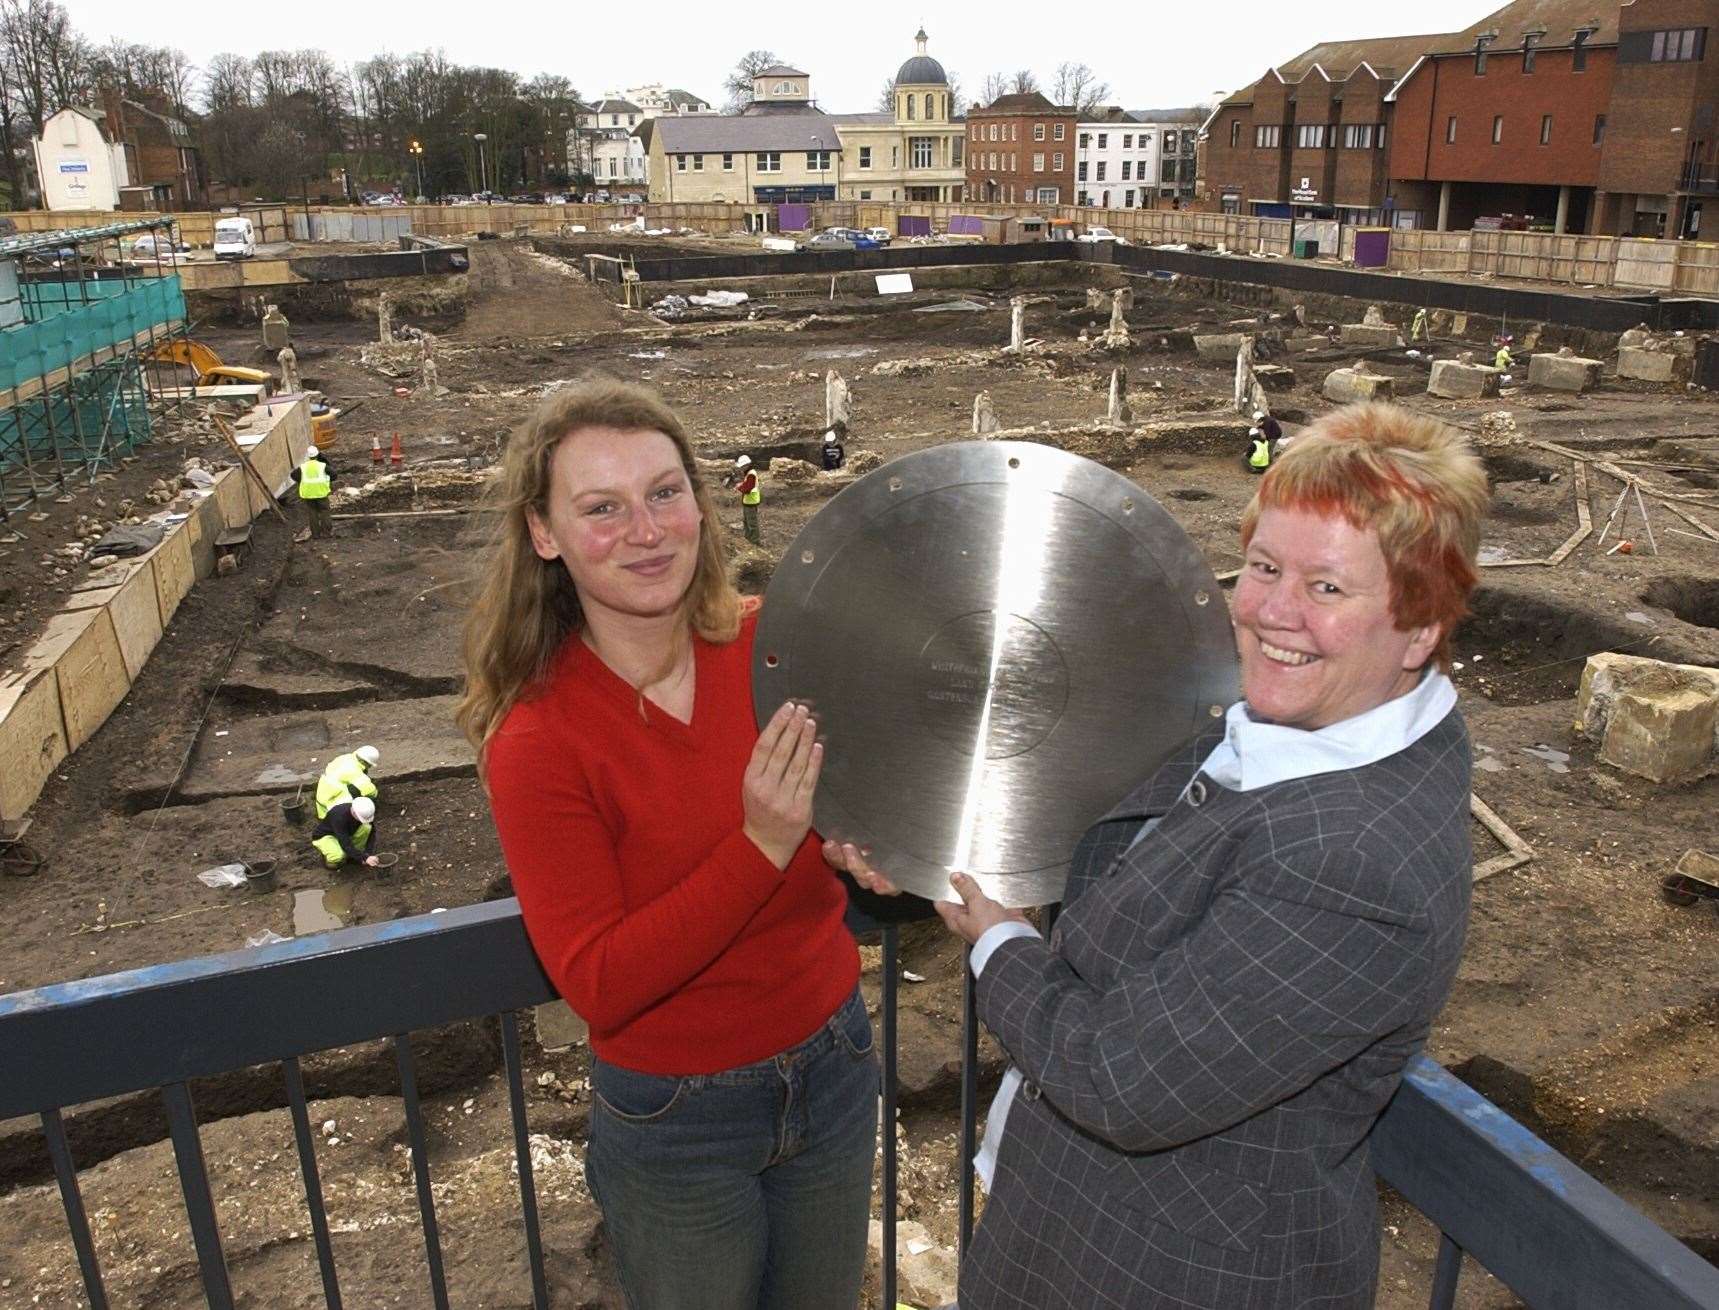 A time capsule was buried under the Whitefriars development in 2002